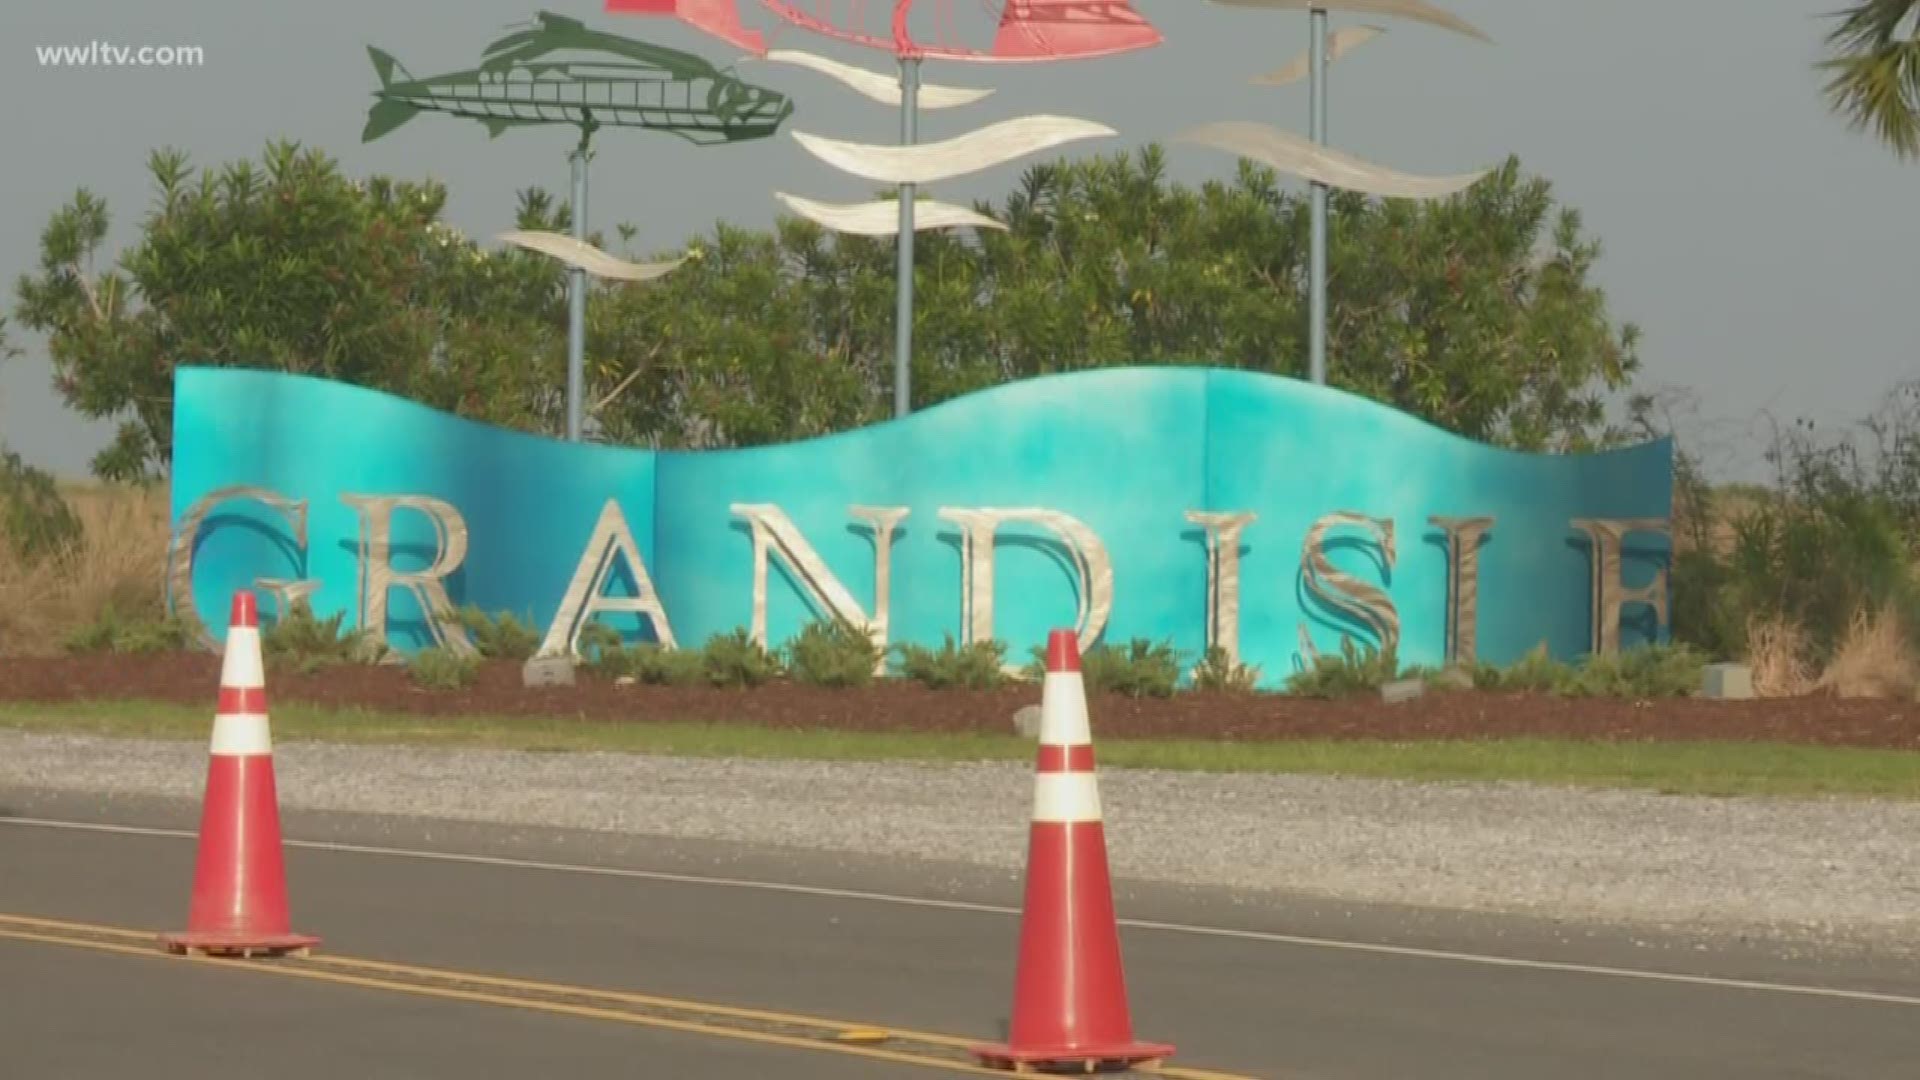 “If you think you’re going to come to Grand Isle and party and walk on our beach, that ain’t going to happen,” said Mayor Camardelle